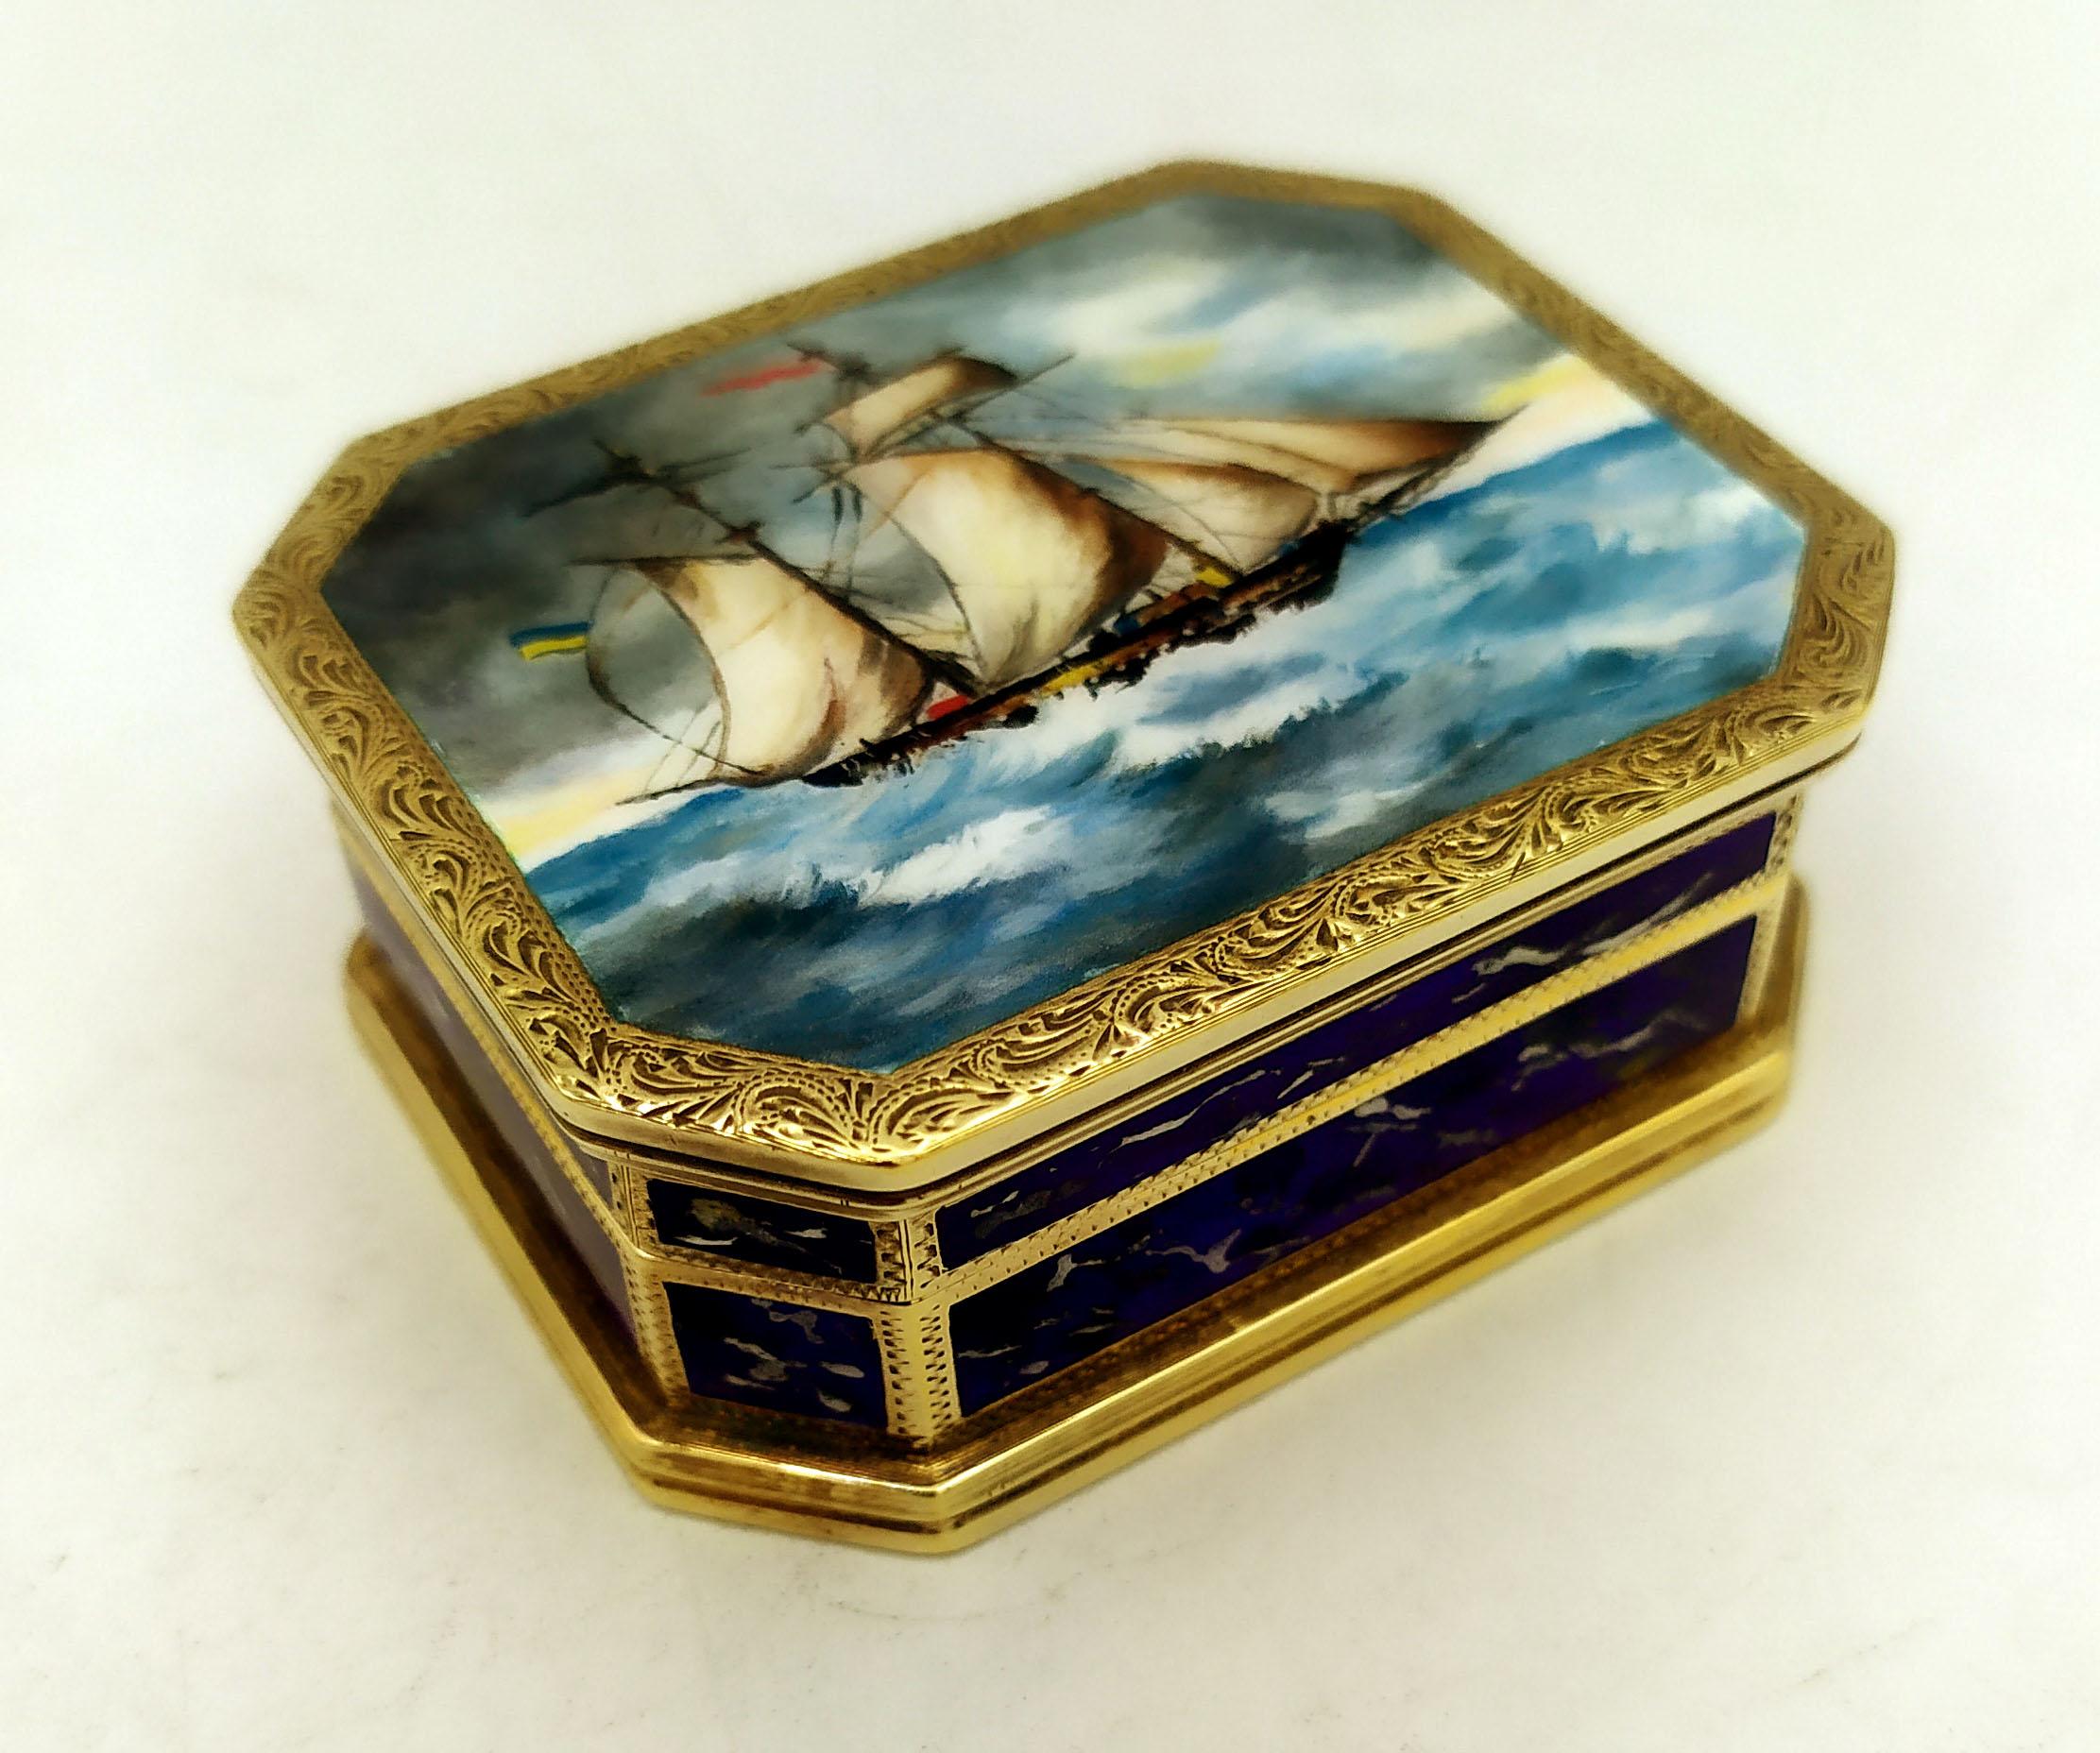 Octagonal snuff box in gilded 925/1000 silver with English Queen Anne style borders and sides with fired enamels painted like lapis lazuli stone. On the lid, a very fine fire-enamelled miniature hand-painted by the painter Renato Dainelli, depicting